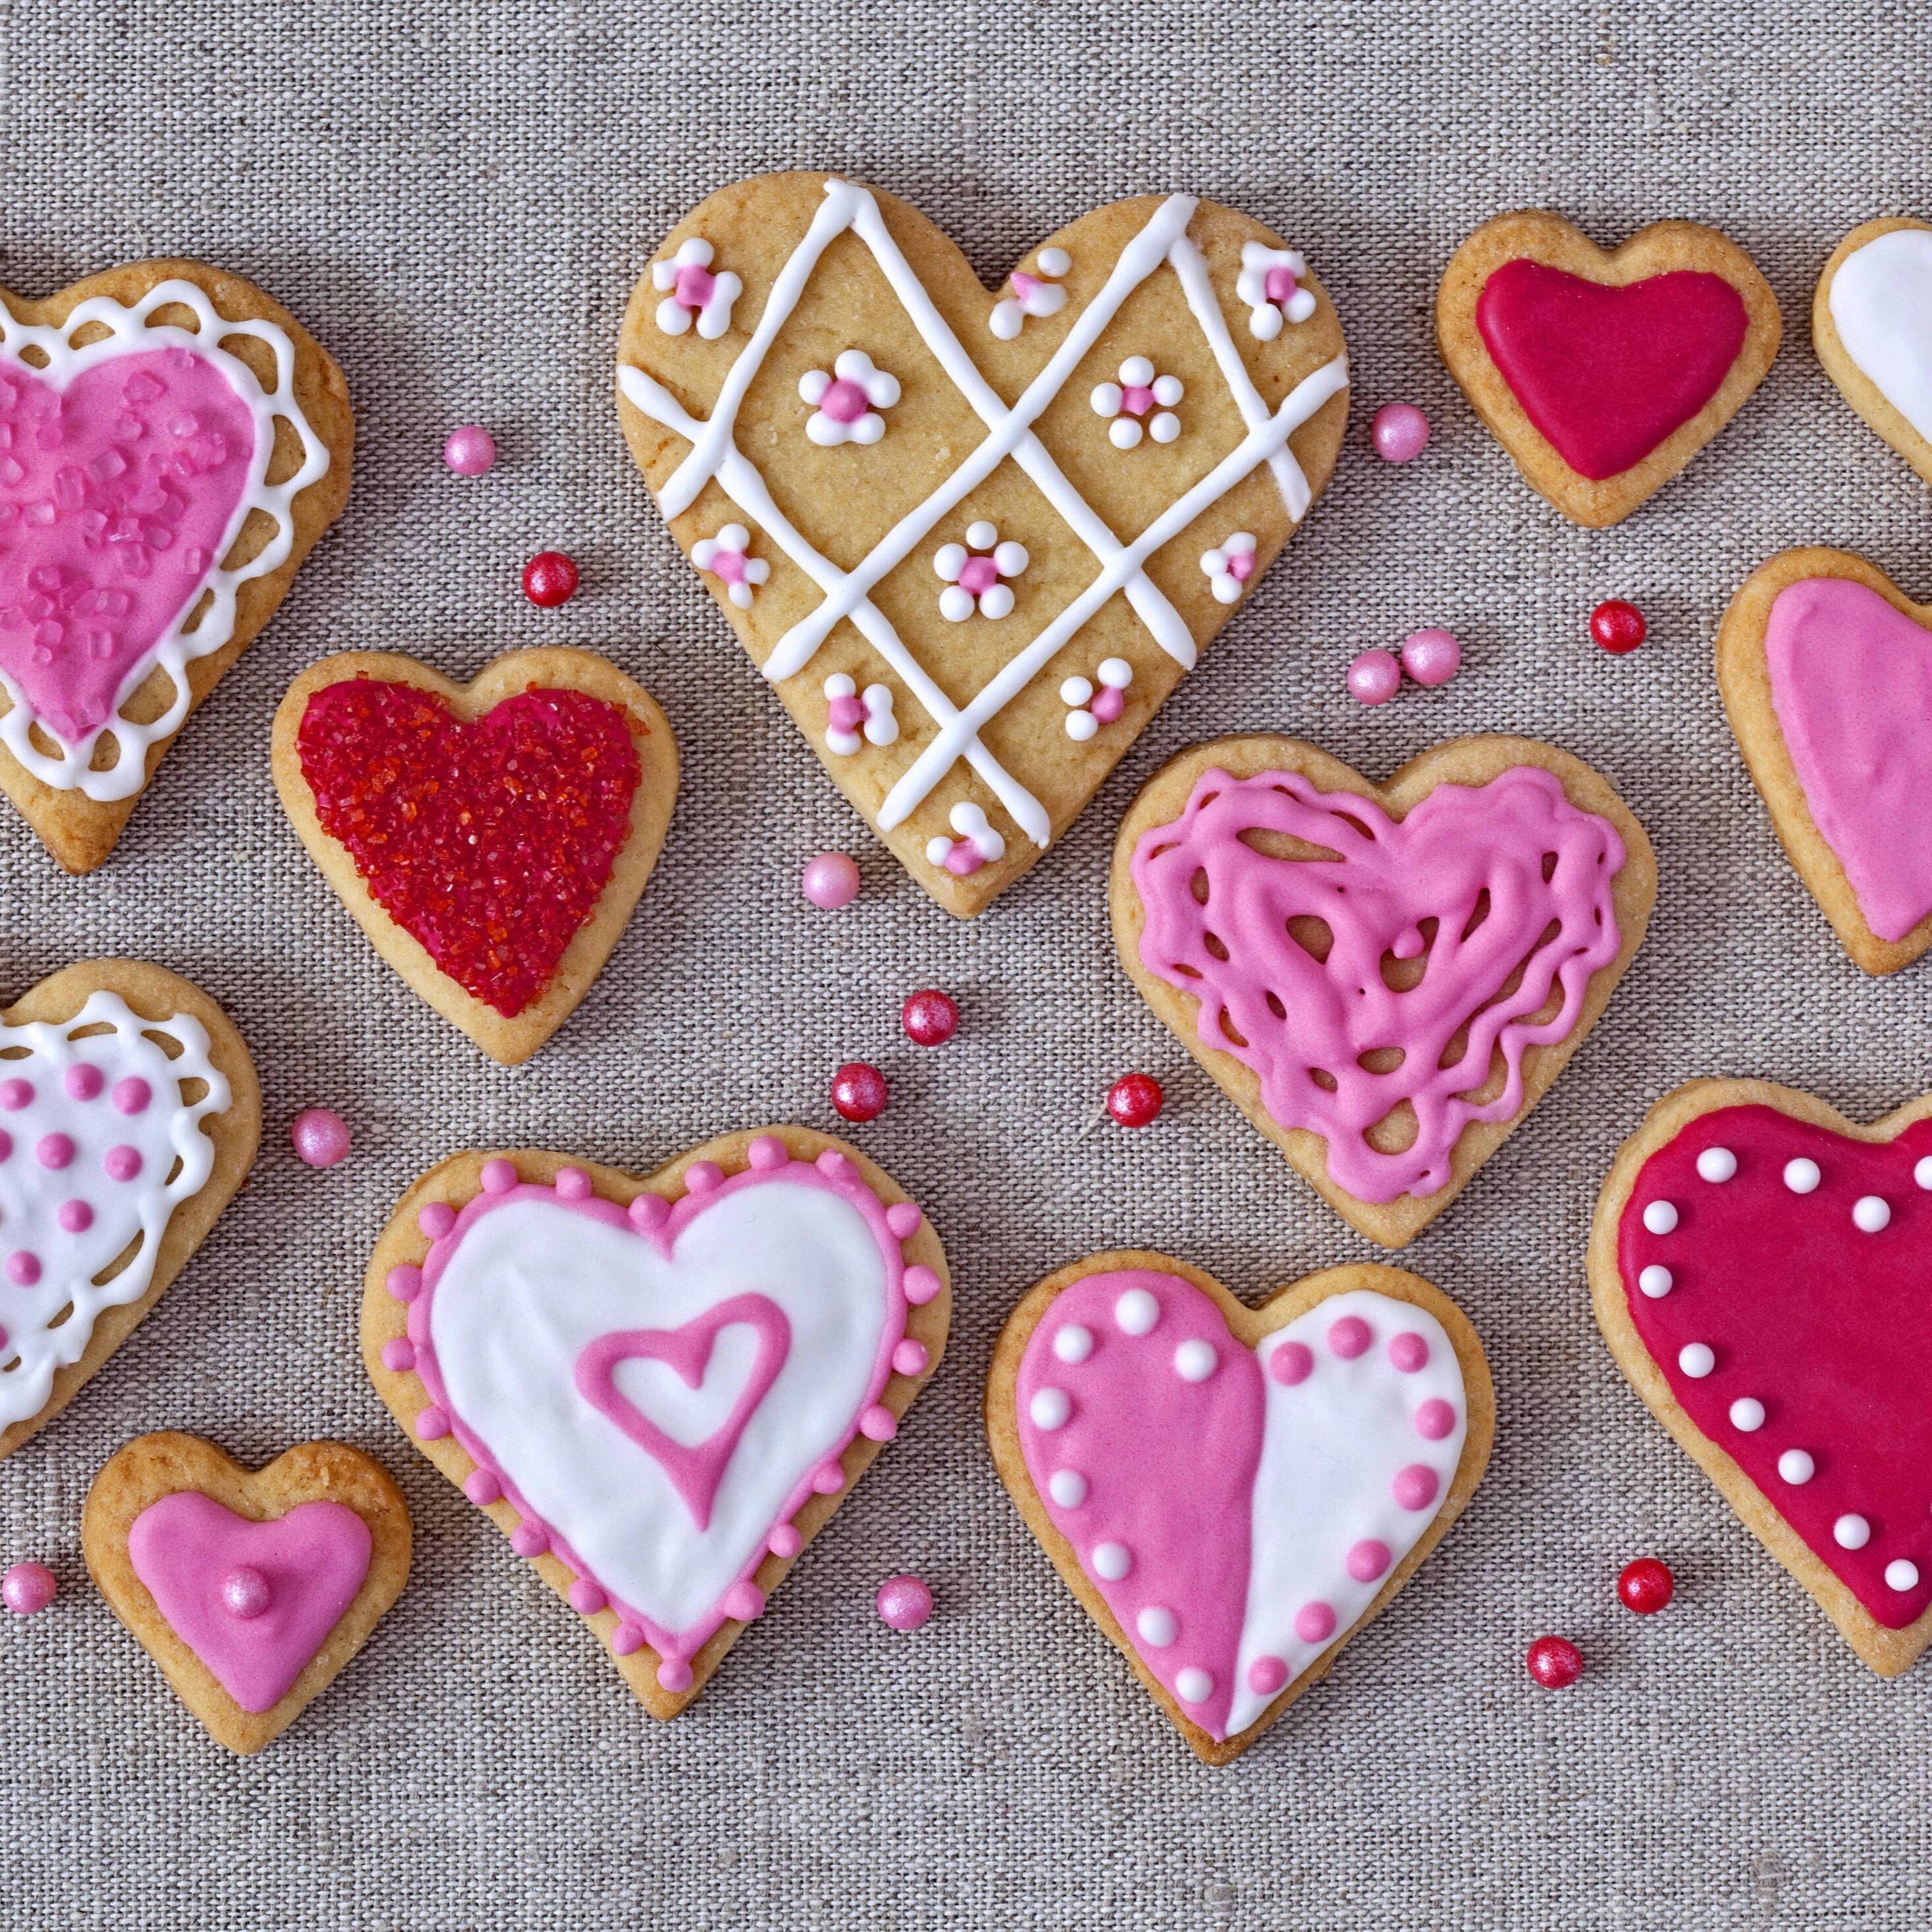 Pink Color Heart Shaped Cookies iPad Pro Retina Display HD 4k Wallpaper, Image, Background, Photo and Picture